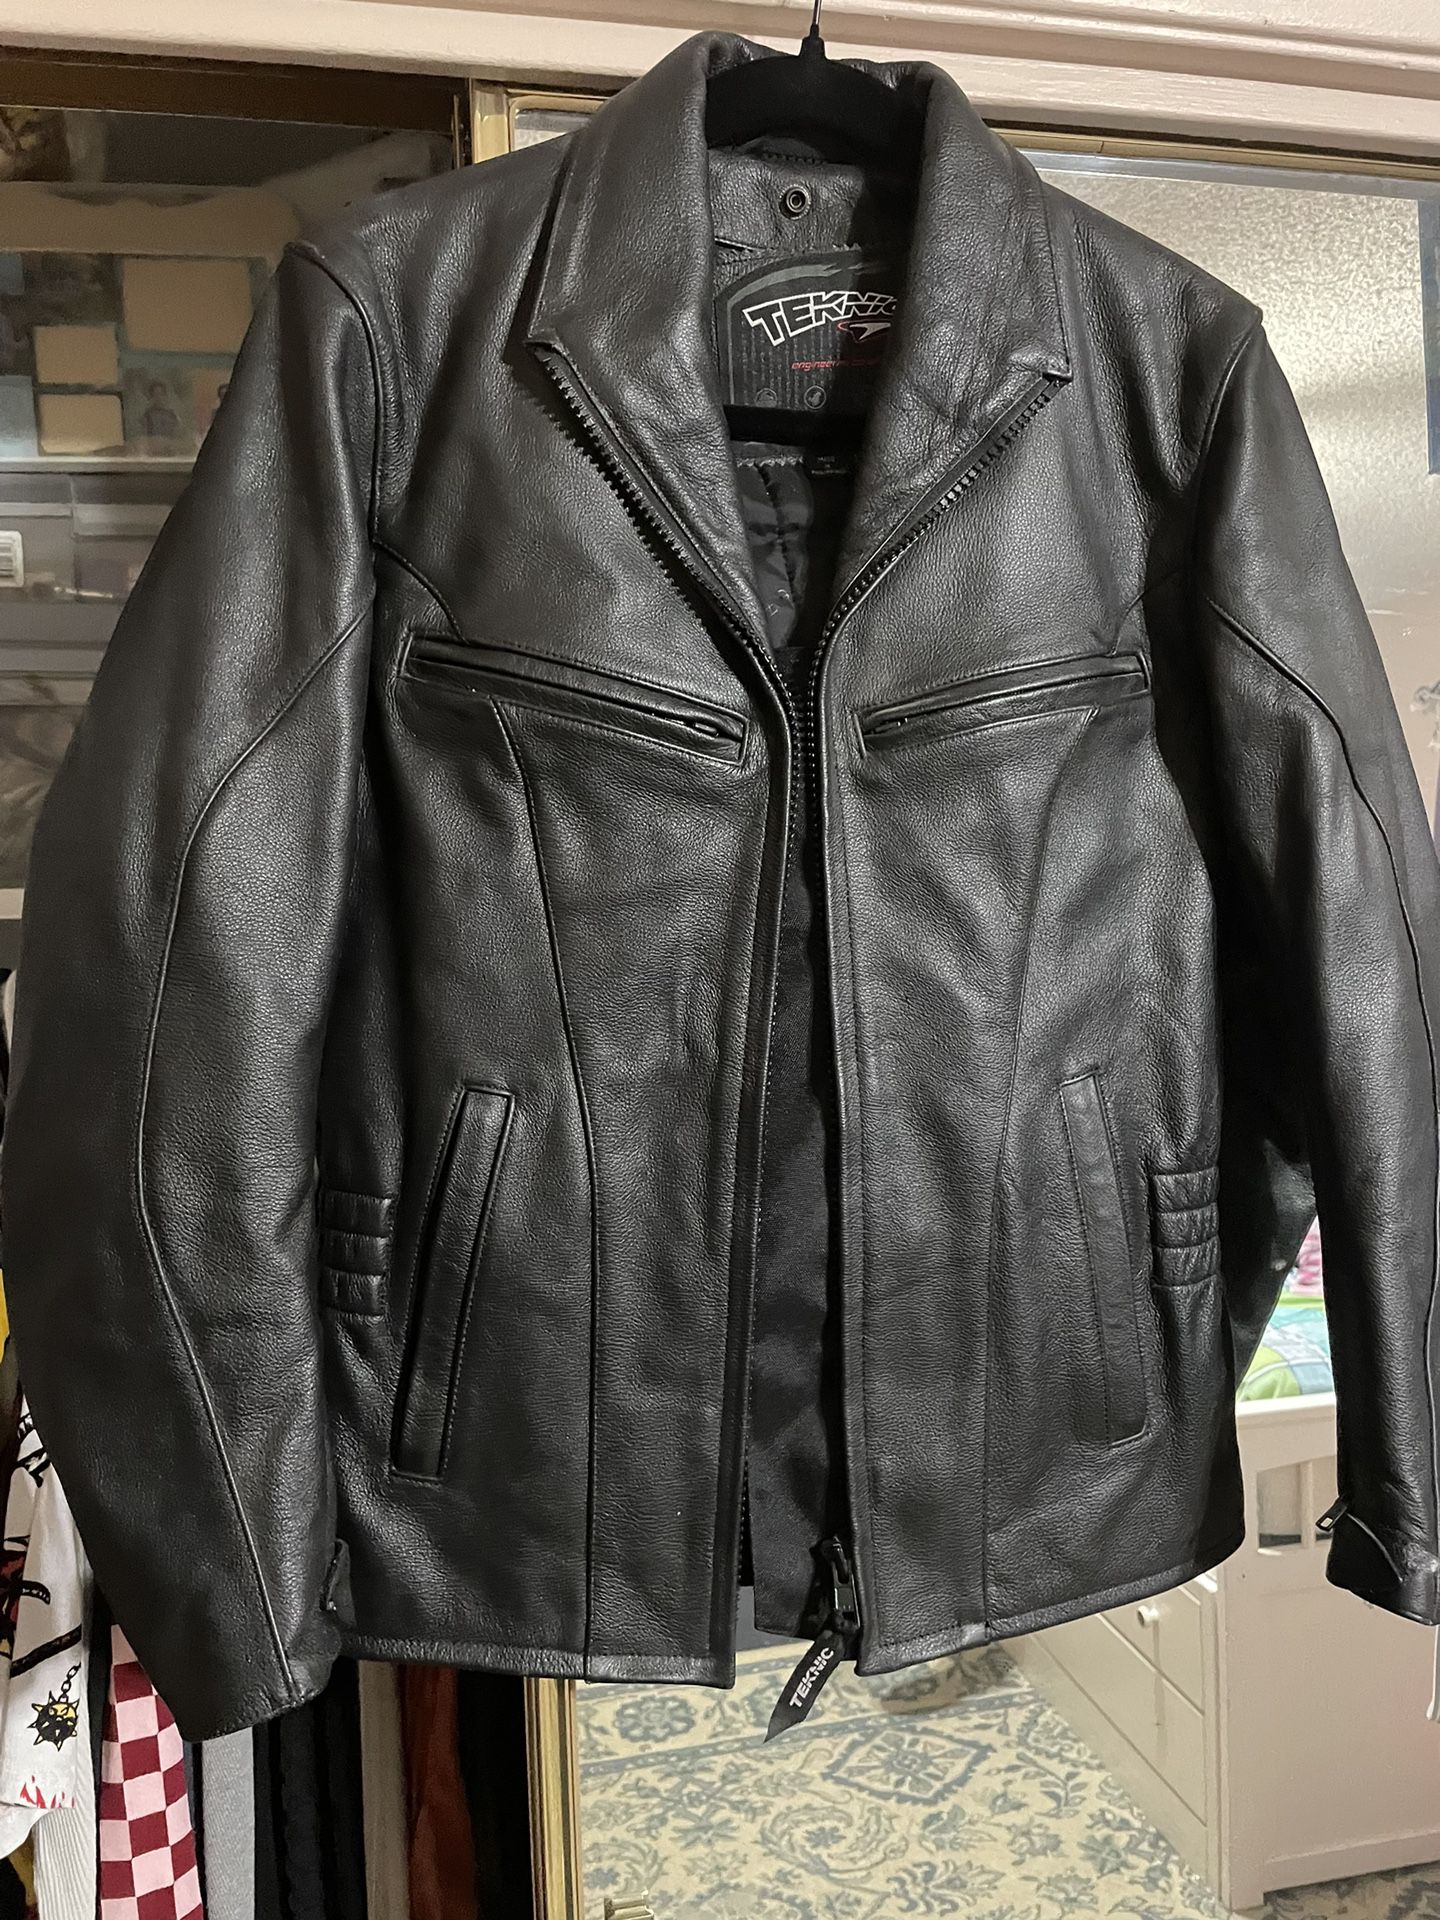 Woman’s Leather Jacket